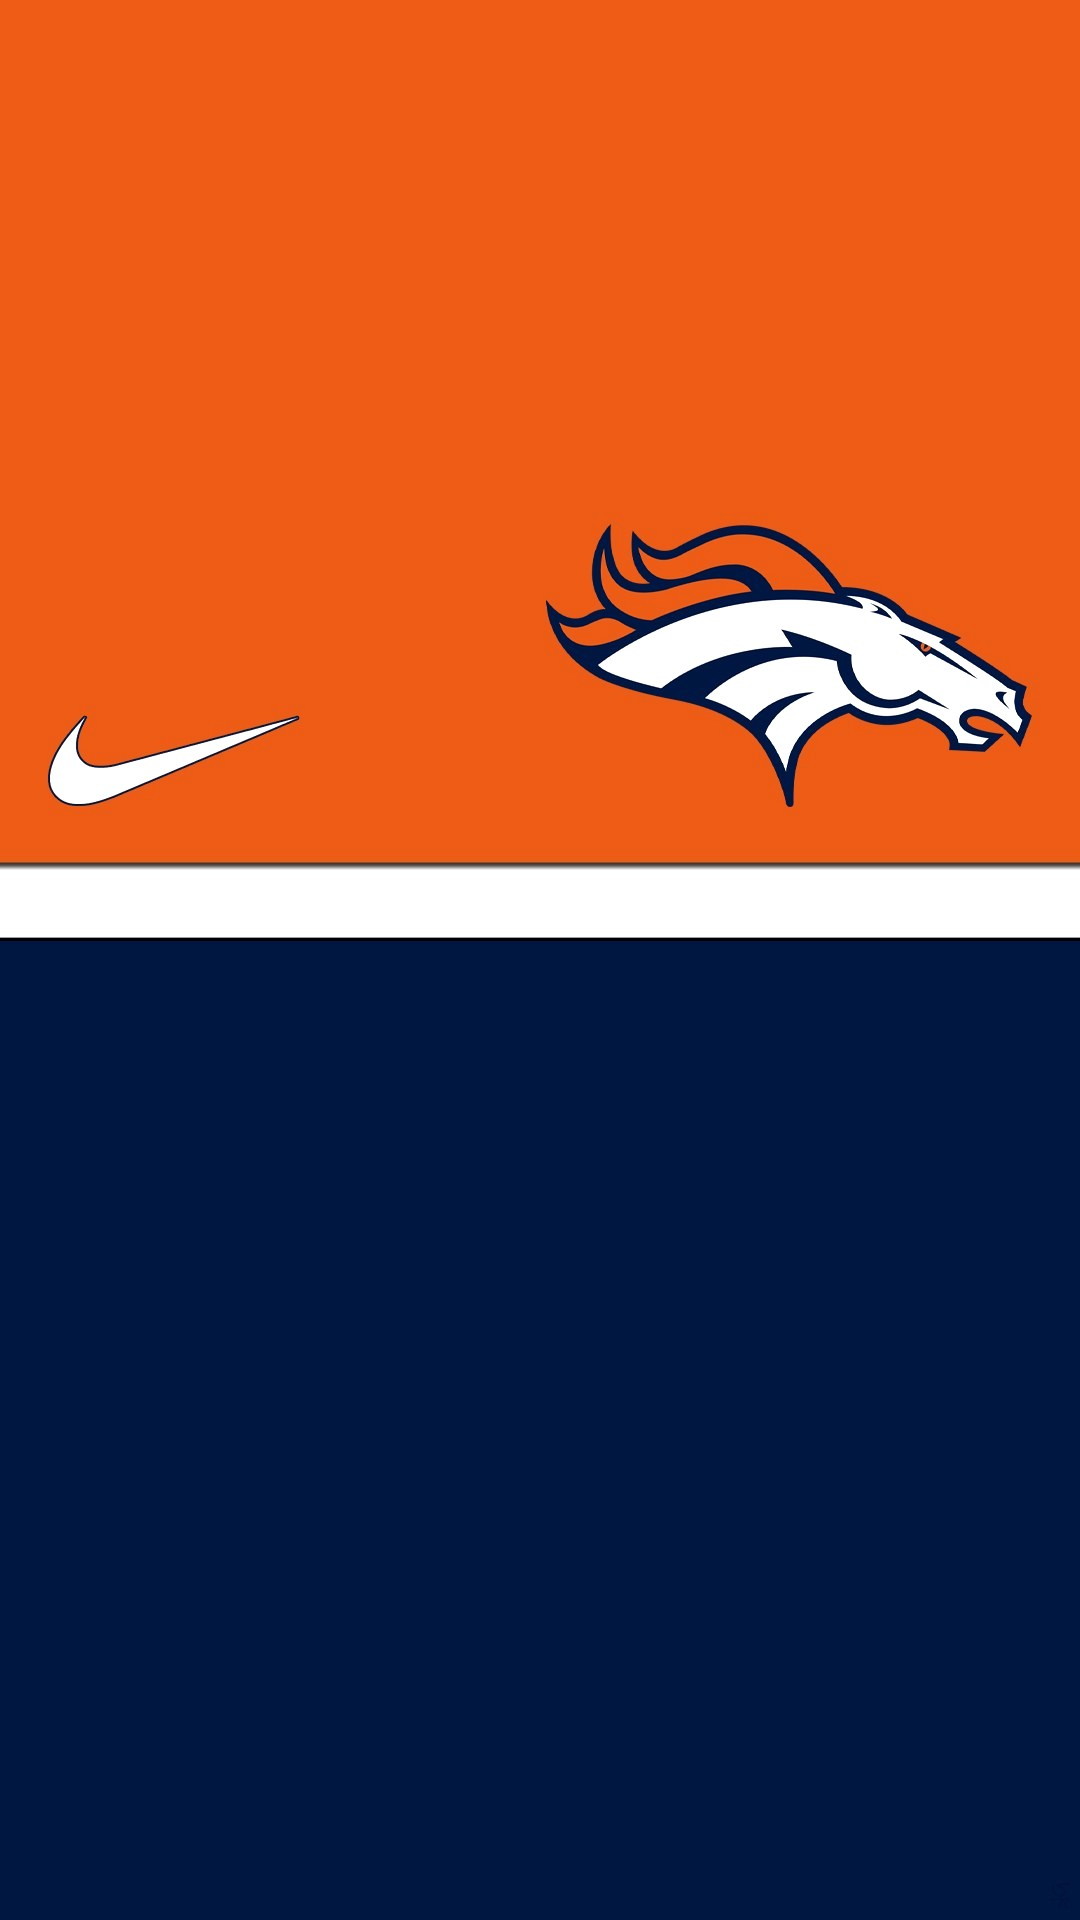 Denver Broncos Wallpaper For Mobile with high-resolution 1080x1920 pixel. You can use and set as wallpaper for Notebook Screensavers, Mac Wallpapers, Mobile Home Screen, iPhone or Android Phones Lock Screen